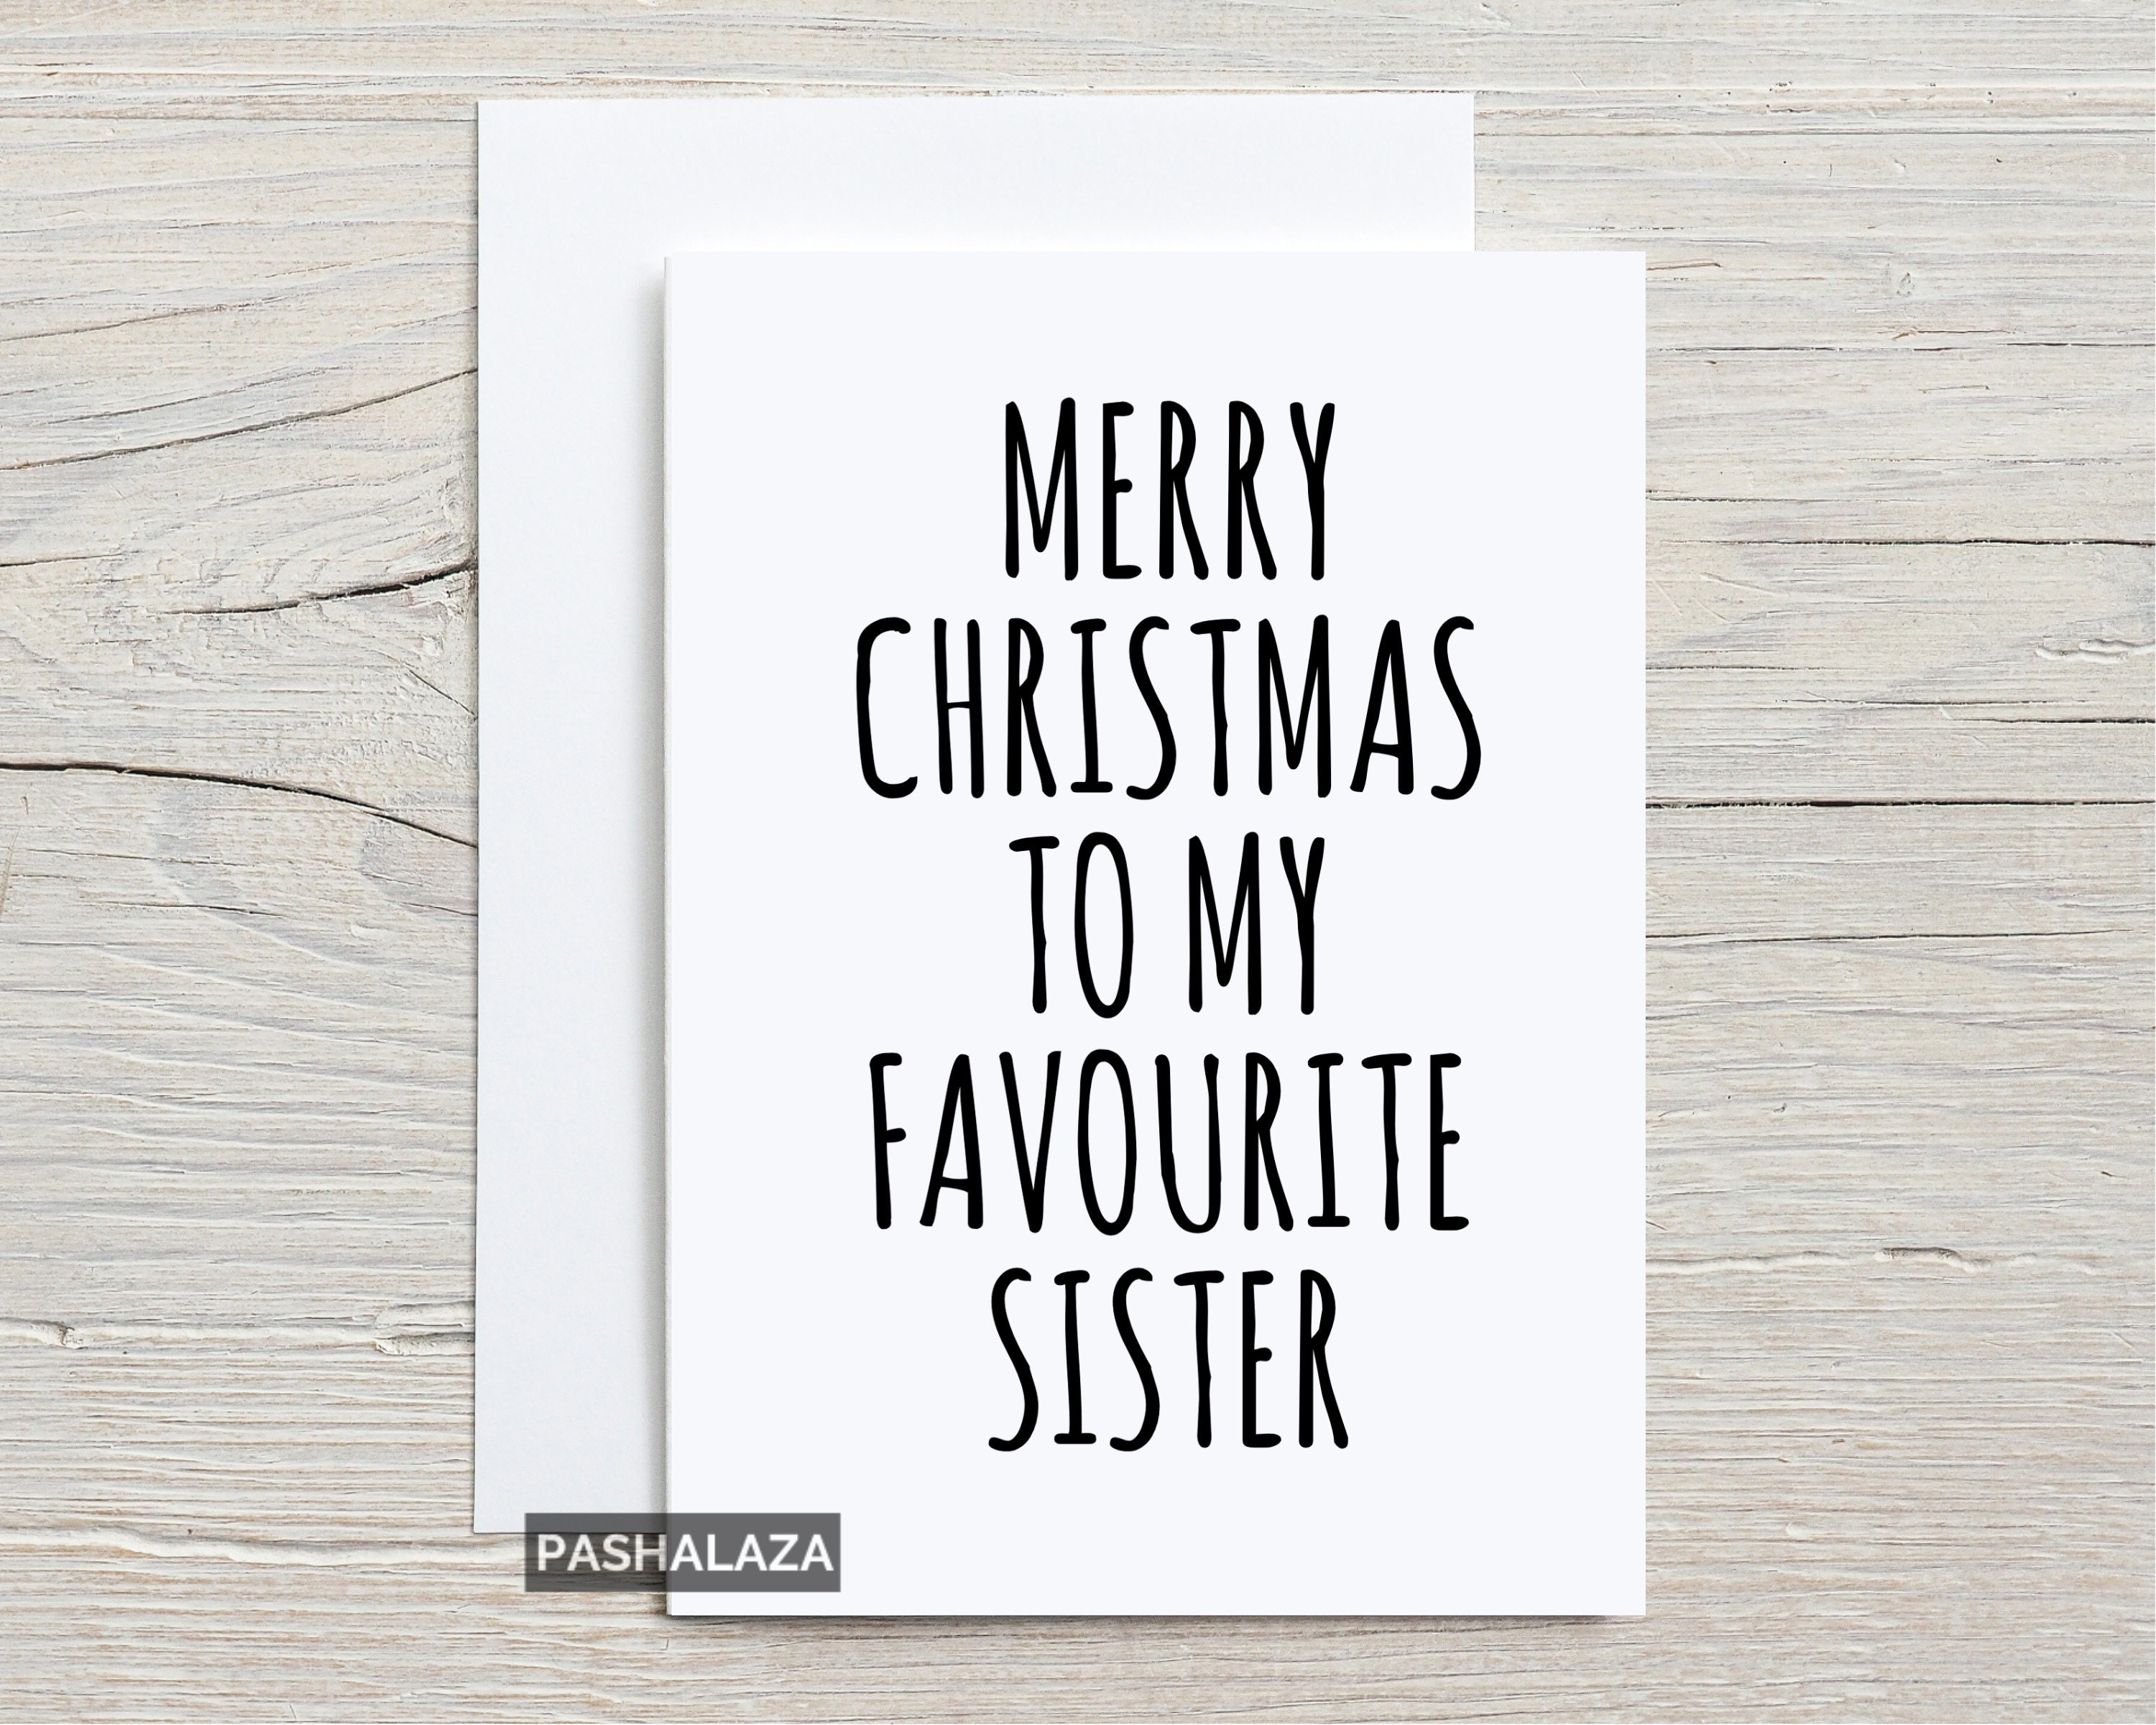 Christmas Card For Sister Funny Christmas Cards For Her Xmas | Etsy